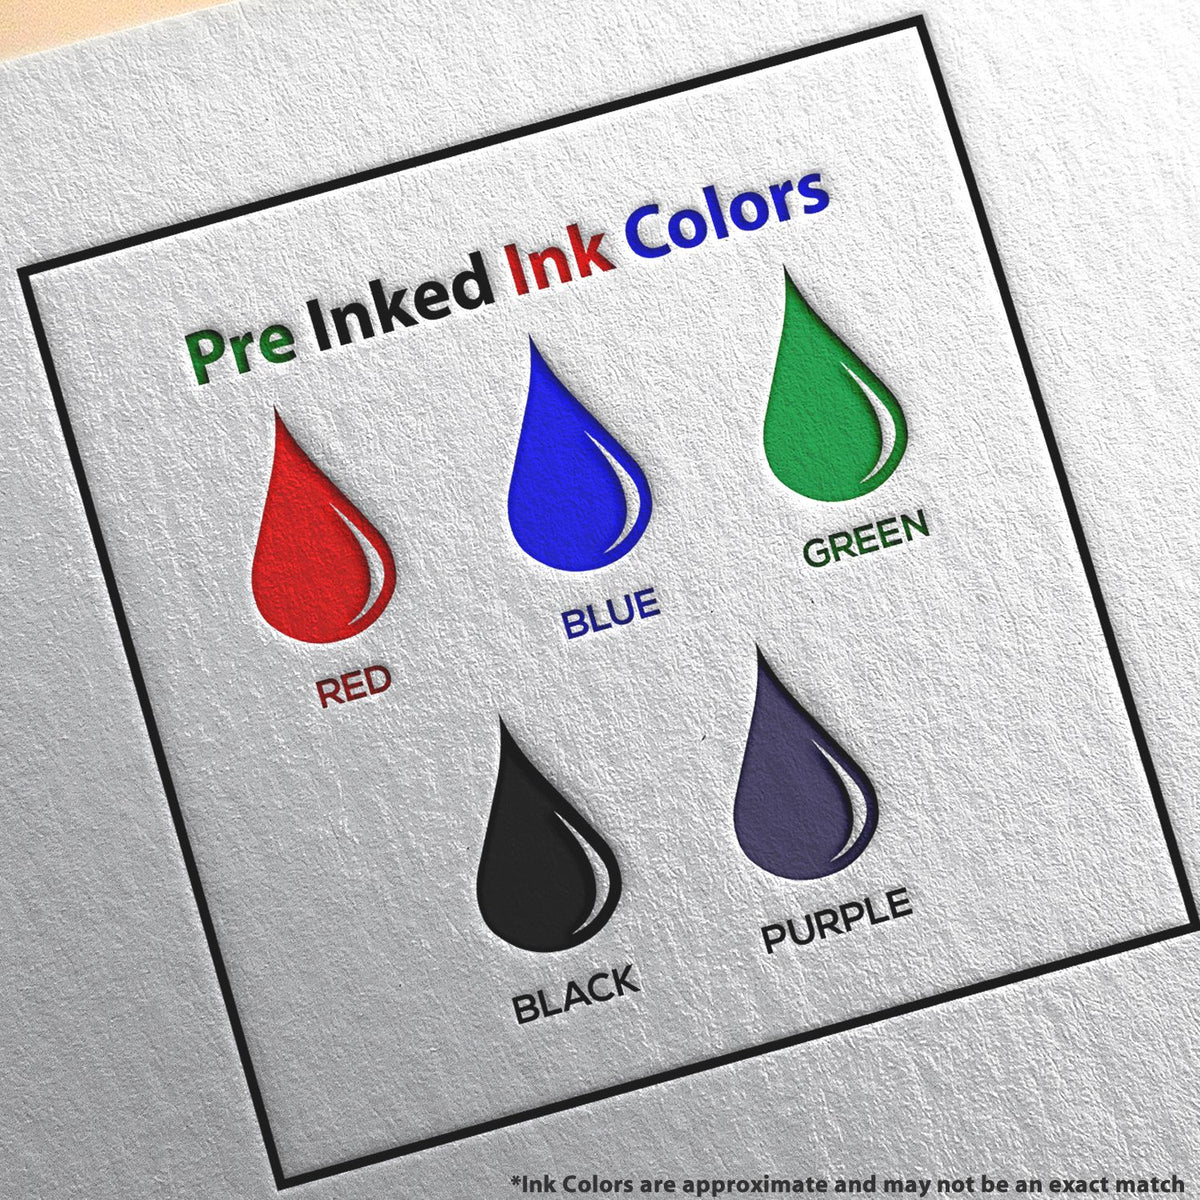 A picture showing the different ink colors or hues available for the Slim Pre-Inked Alaska Architect Seal Stamp product.